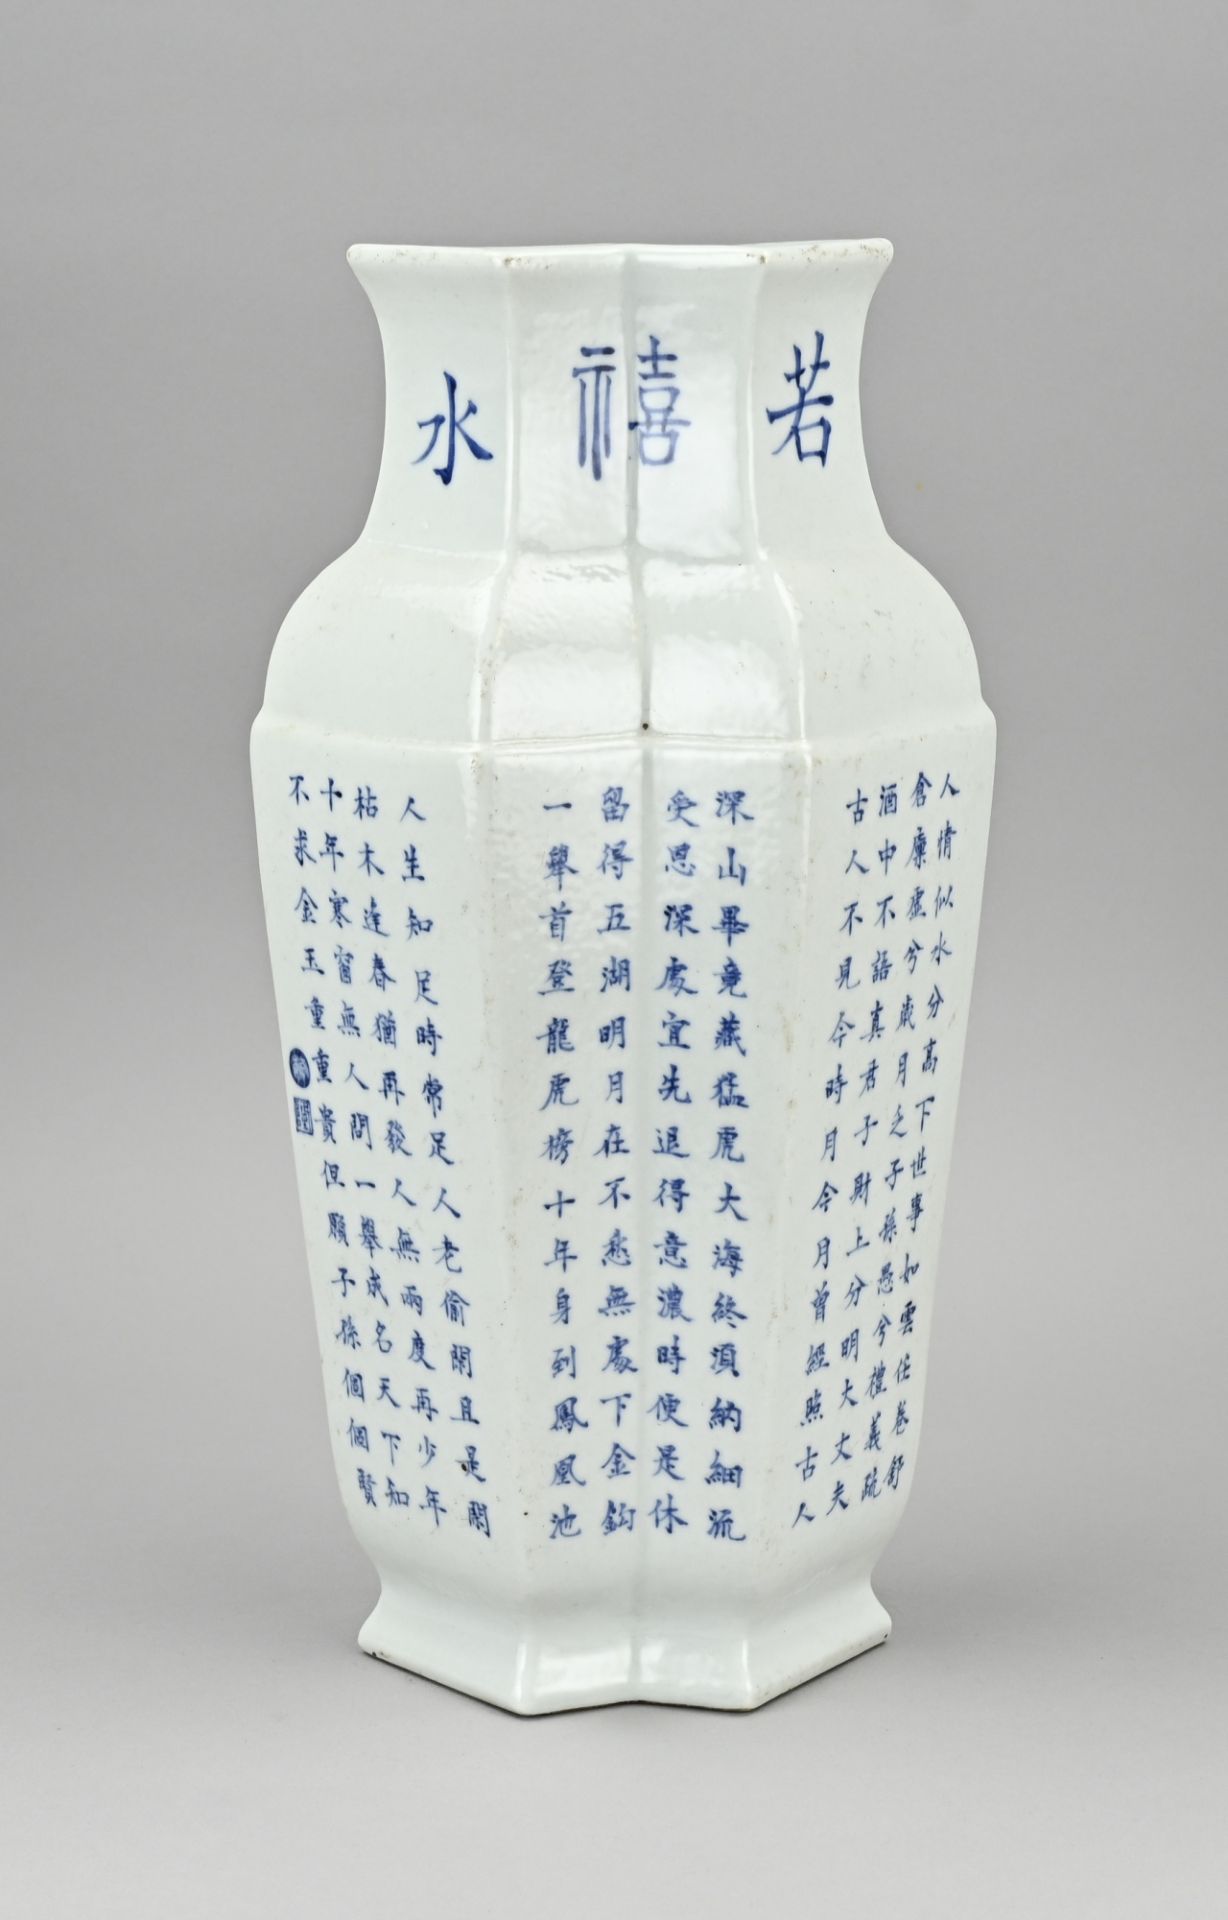 Chinese vase with text, H 35.3 cm.